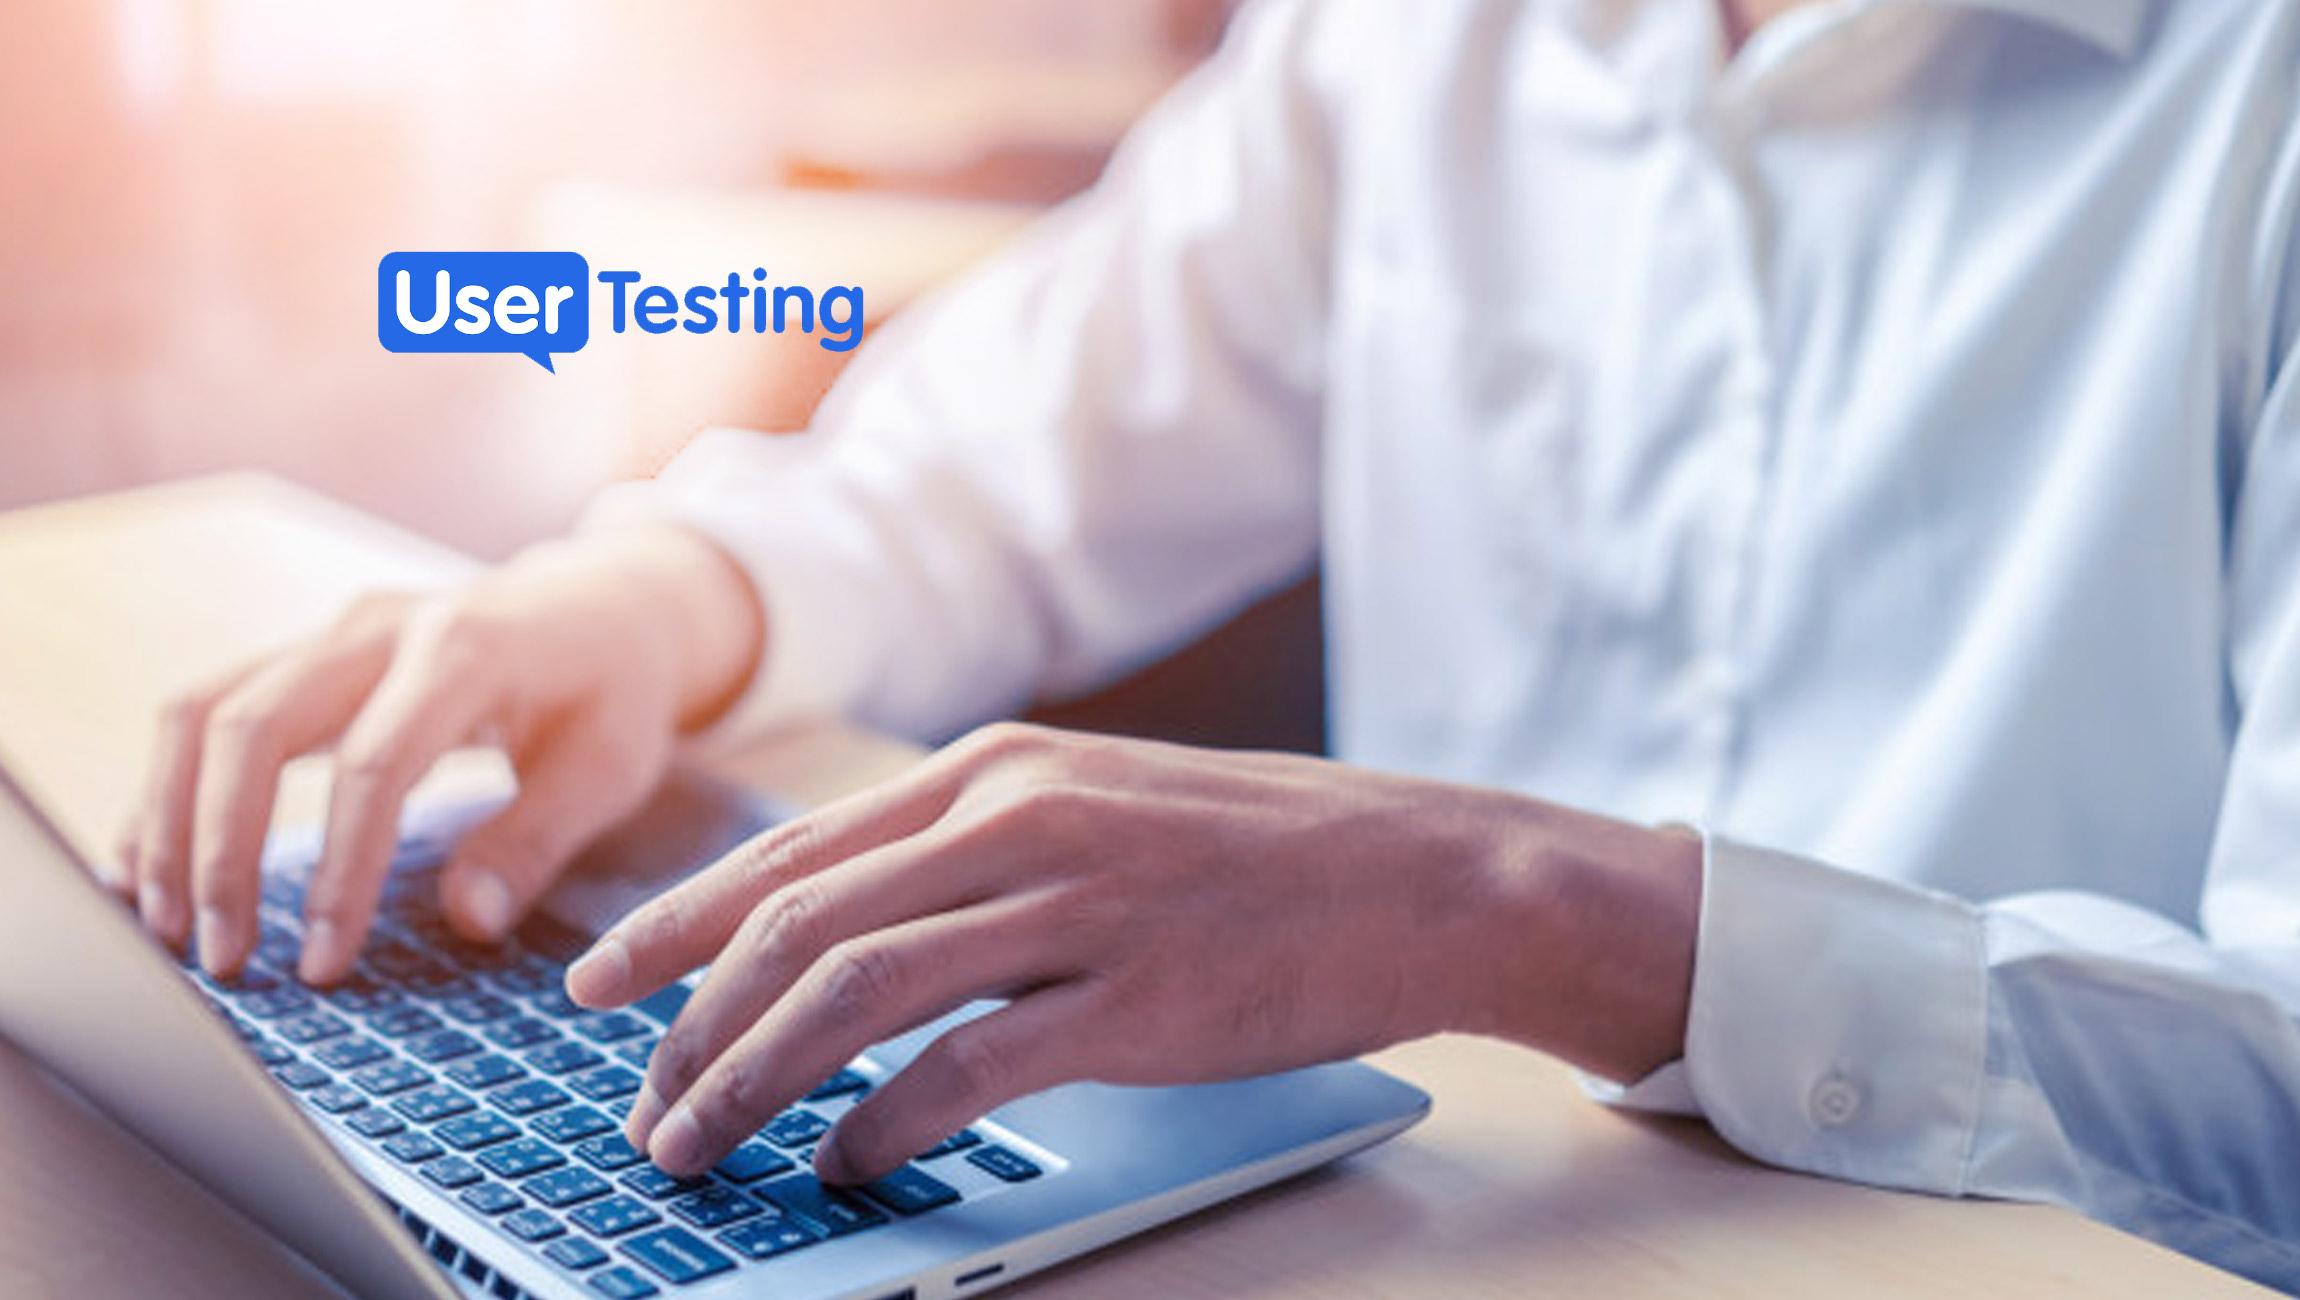 UserTesting Launches New Test Types and Interactive Visualization Capabilities to Bring Greater Customer Insight and Intuition to Businesses